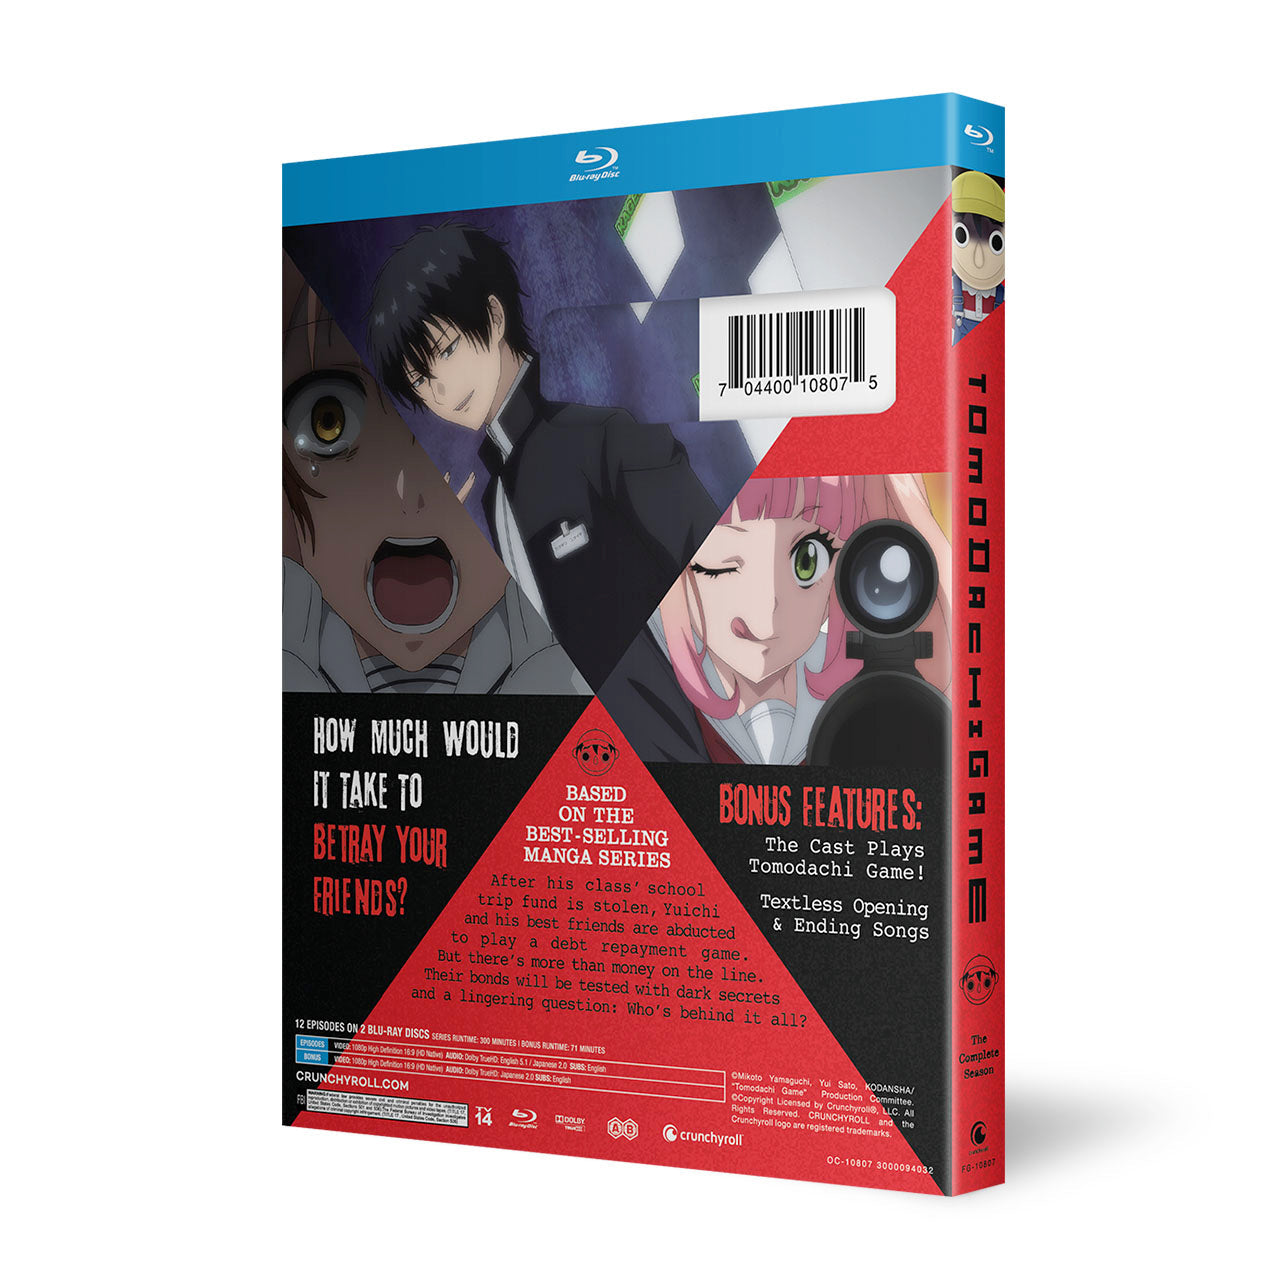 Tomodachi Game - The Complete Season - Blu-Ray image count 2